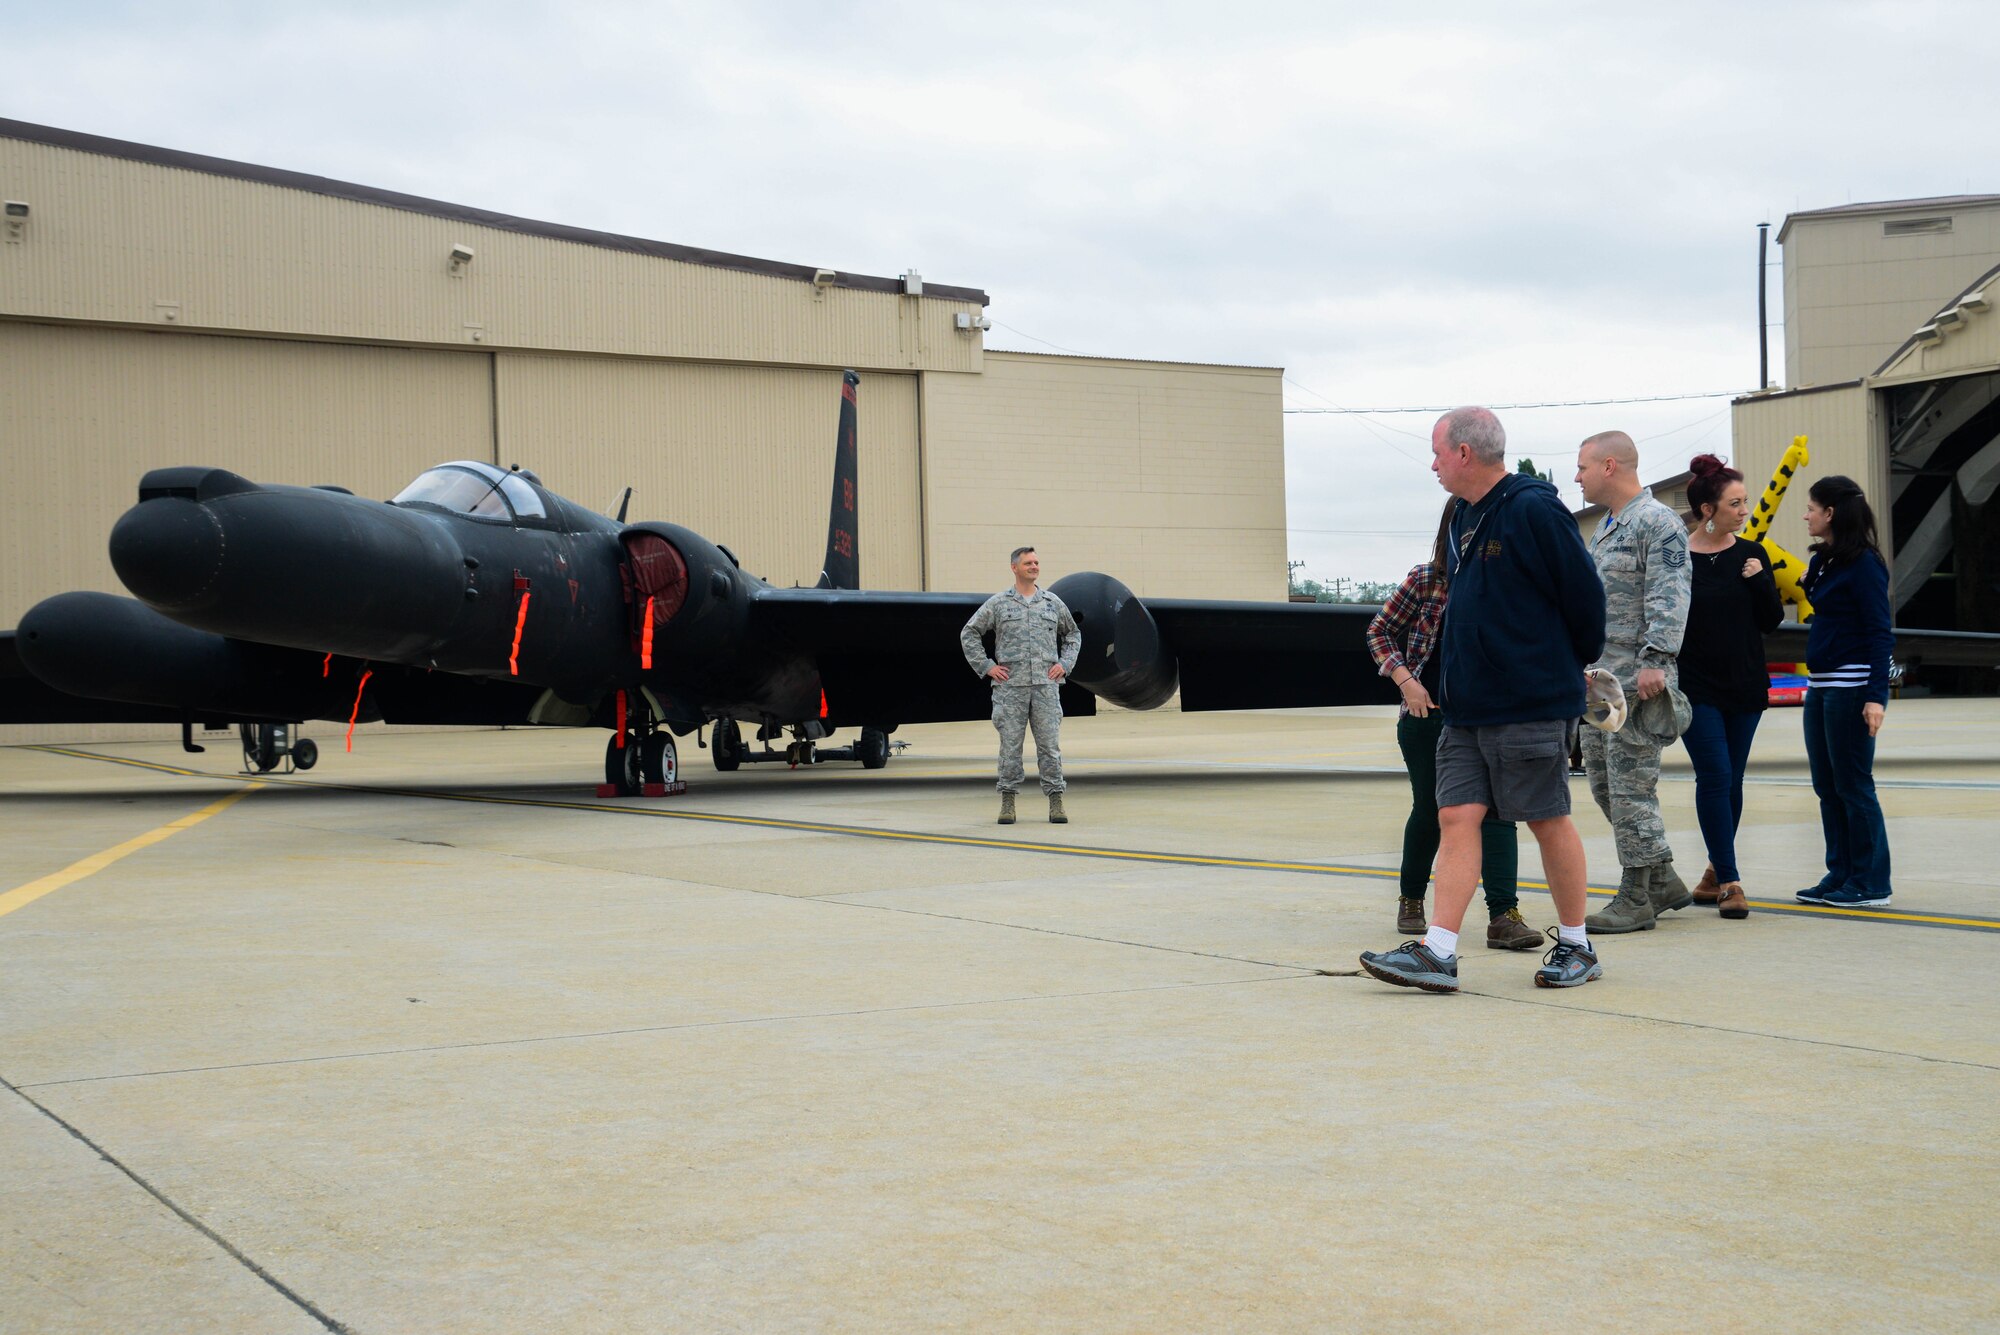 Team Osan families and Airmen gaze upon a U-2 Dragon Lady static display during the 40th Anniversary U-2 Ceremony May 6, 2016, at Osan Air Base, Republic of Korea. Members from the 5th Reconnaissance Squadron organized the ceremony to honor their unit heritage as well as give thanks to Team Osan for their support.  (U.S. Air Force photo by Senior Airman Dillian Bamman/Released)